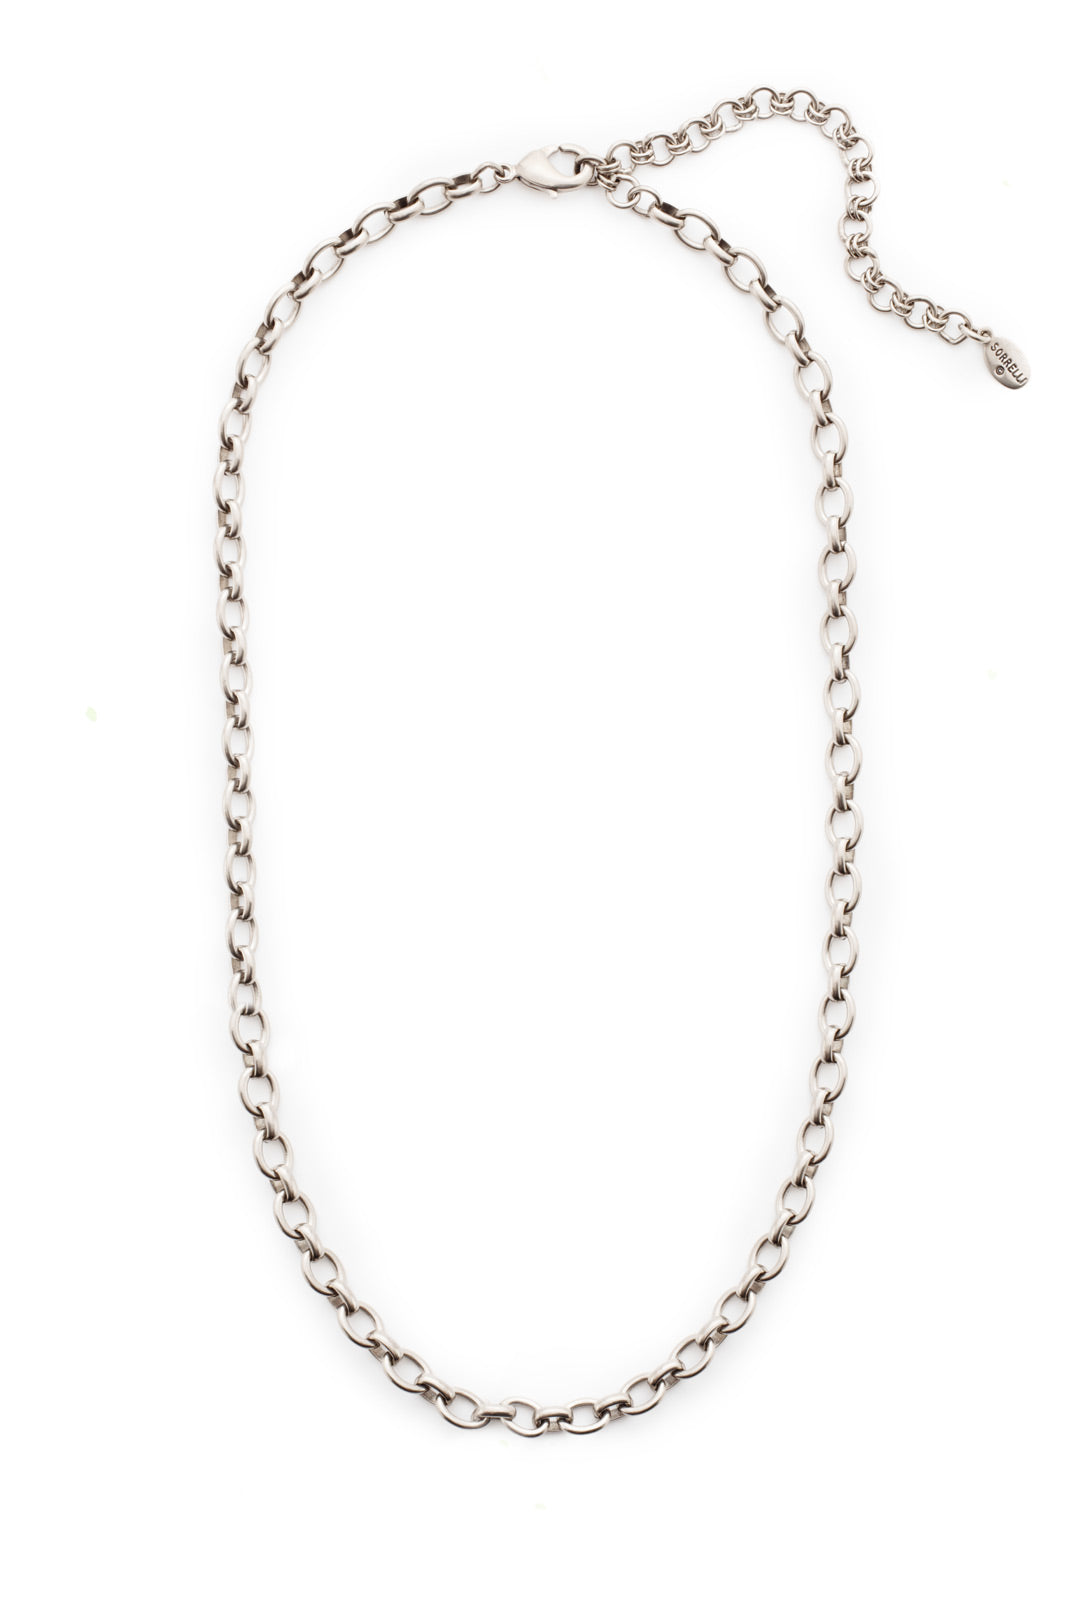 Maci Tennis Necklace - 4NEU94ASCRY - The Maci Tennis Necklace is a little chunky but a simple stunner you can wear for years and years to come. From Sorrelli's Crystal collection in our Antique Silver-tone finish.